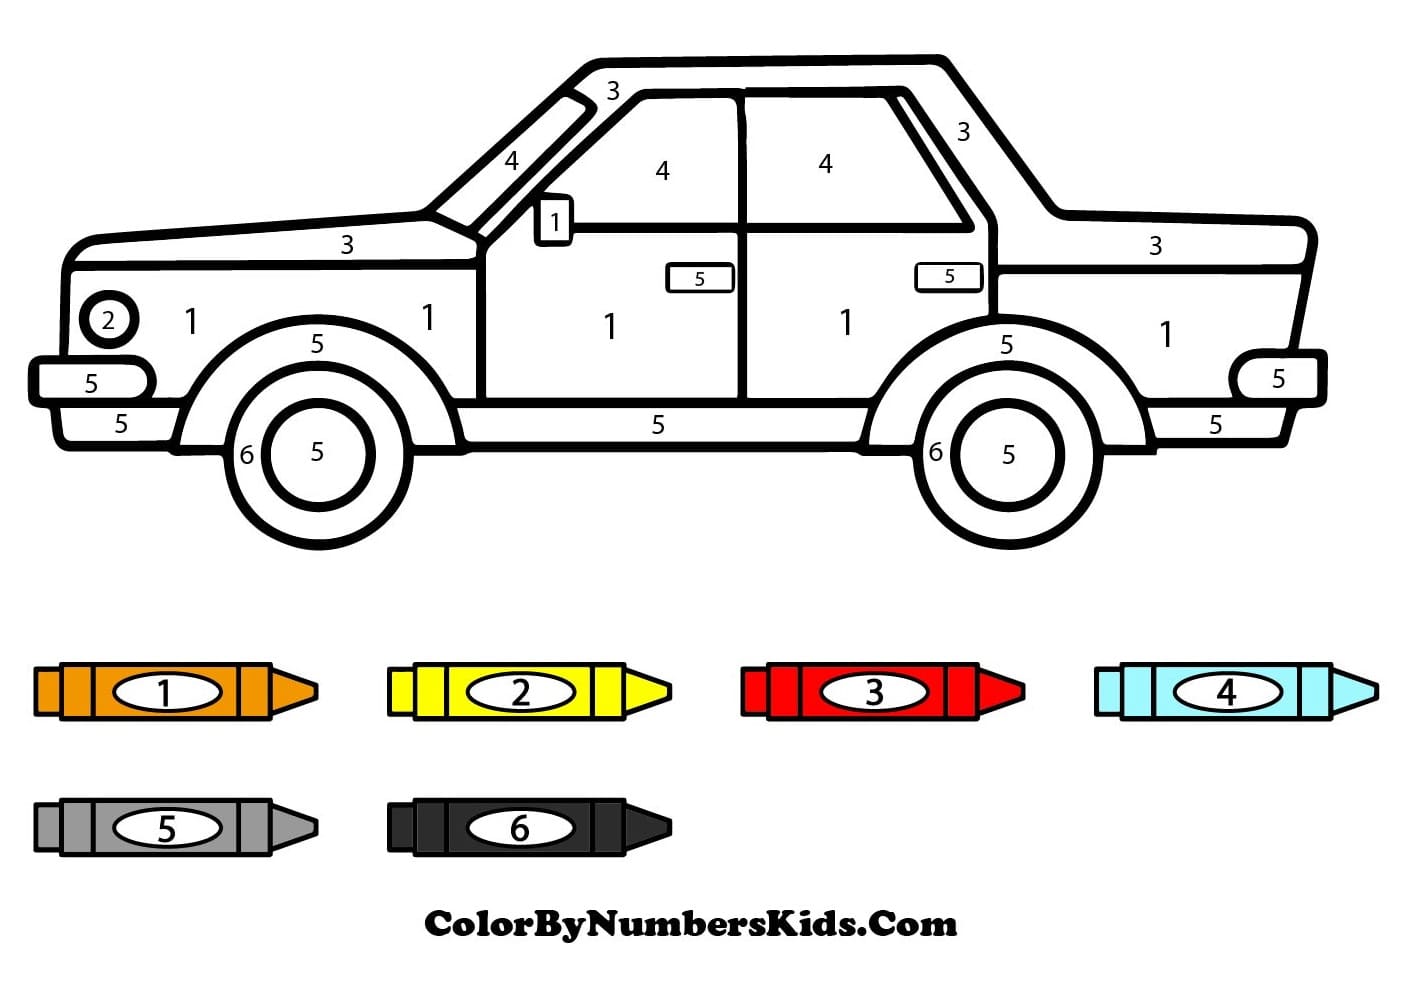 The Car Color By Number